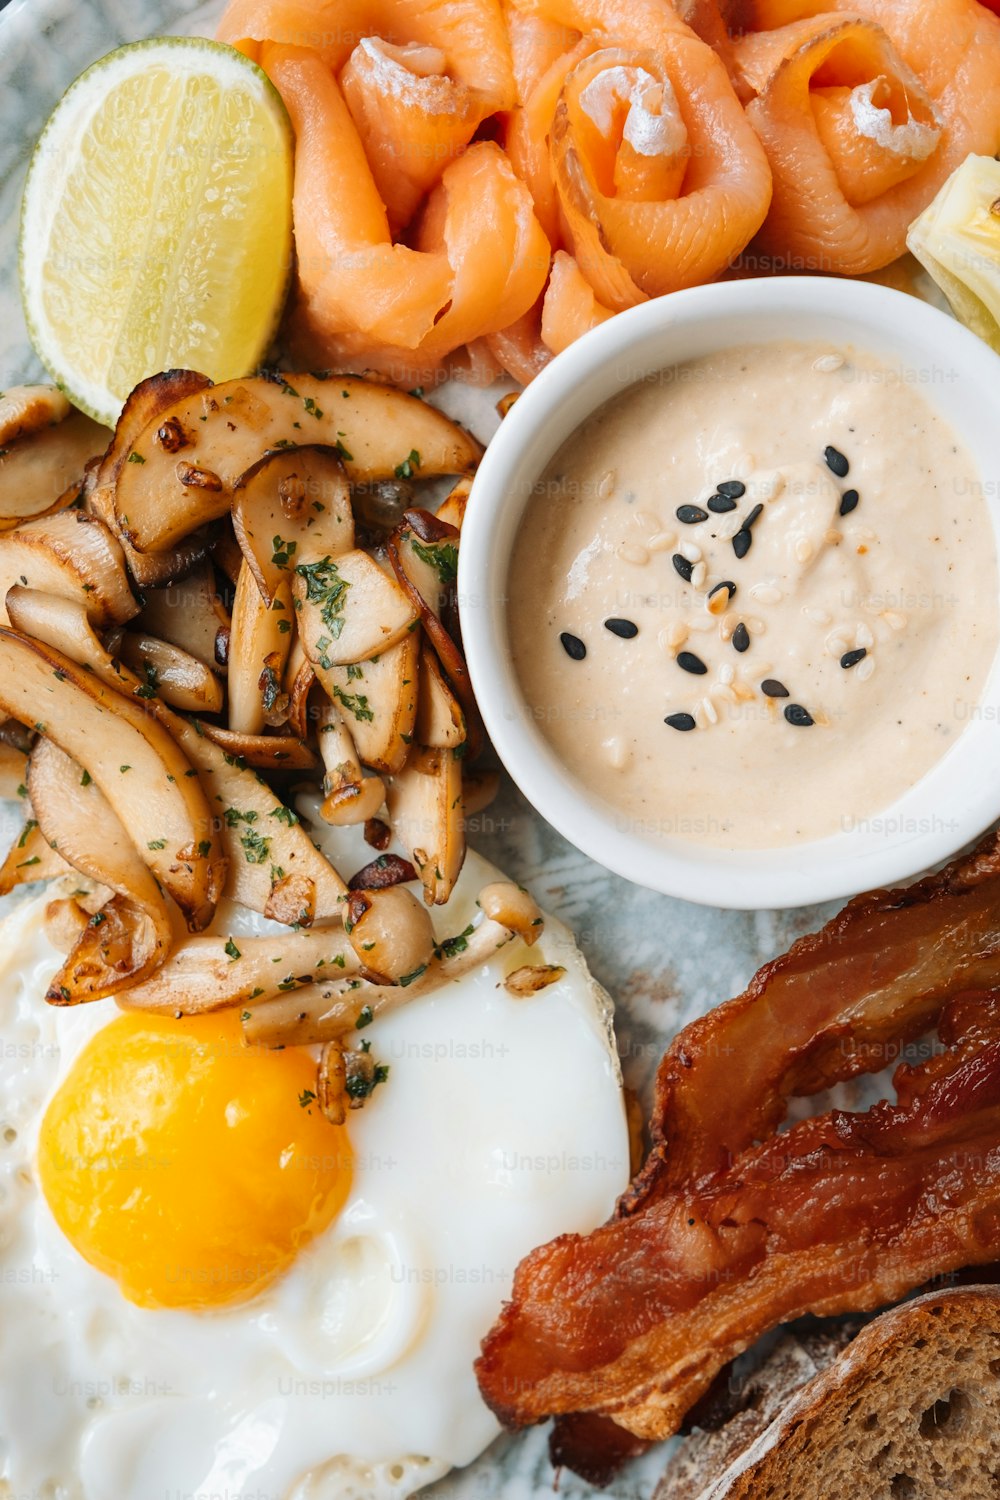 a plate of food with eggs, bacon, and carrots